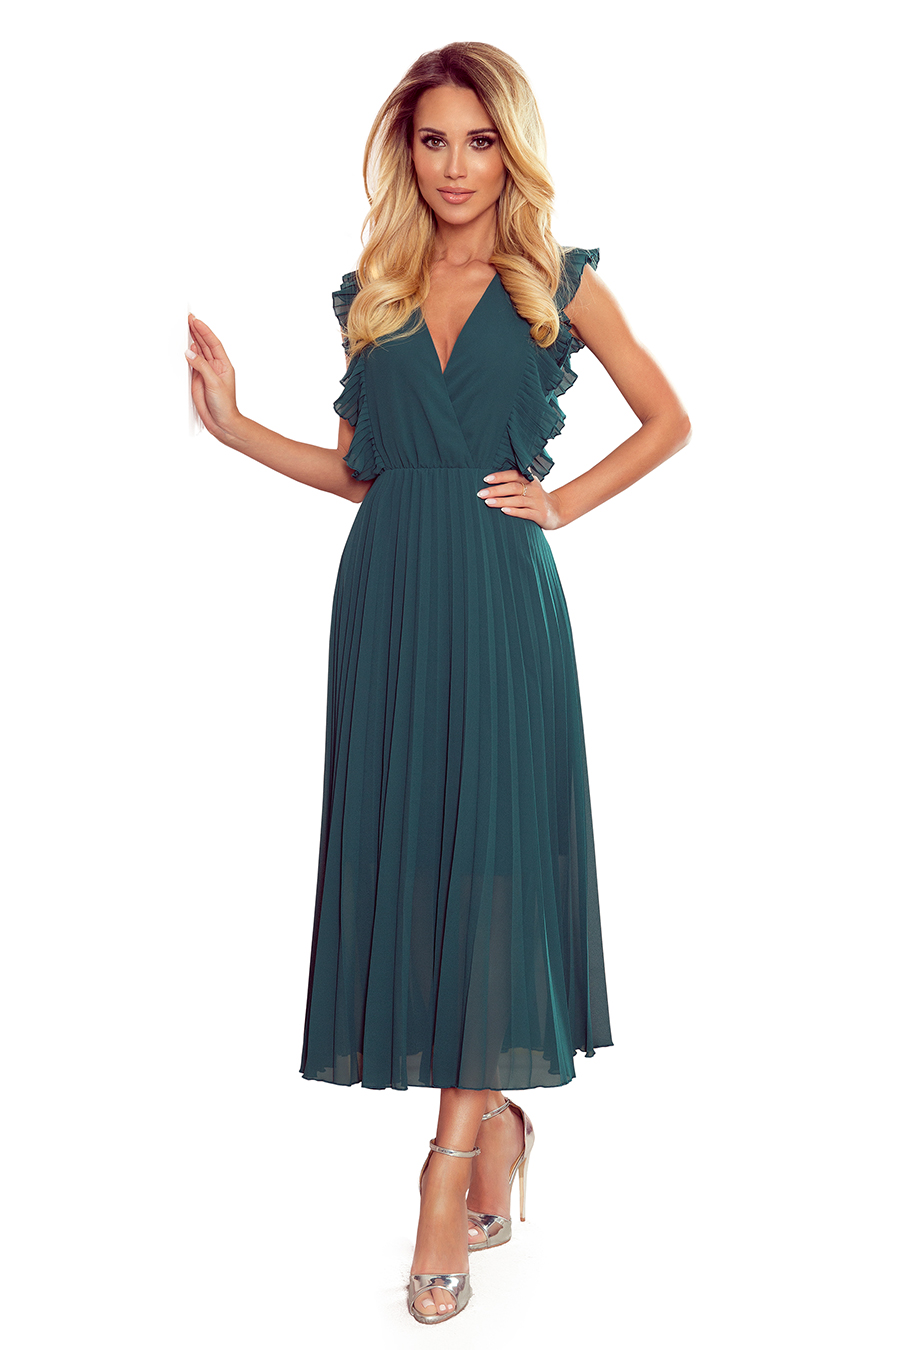 315-1 EMILY Pleated dress with frills and neckline - green - Numoco ...